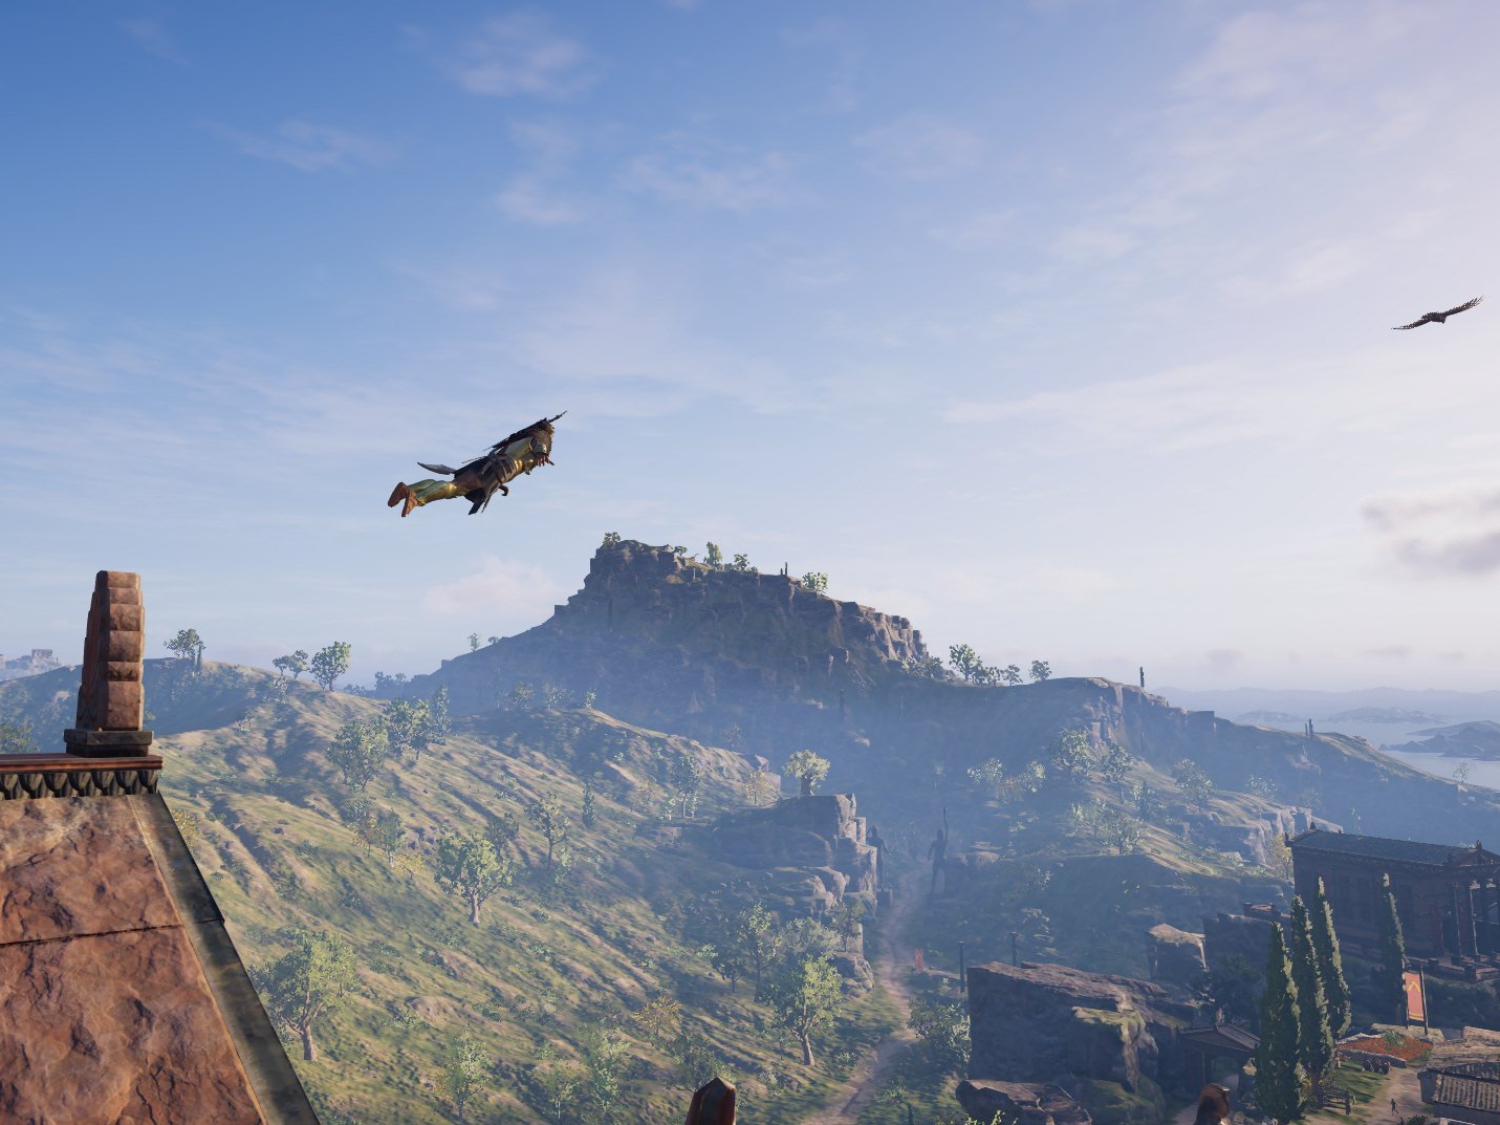 Kassandra taking a leap of faith from the Temple of Athena in Sparta in Assassin's Creed Odyssey